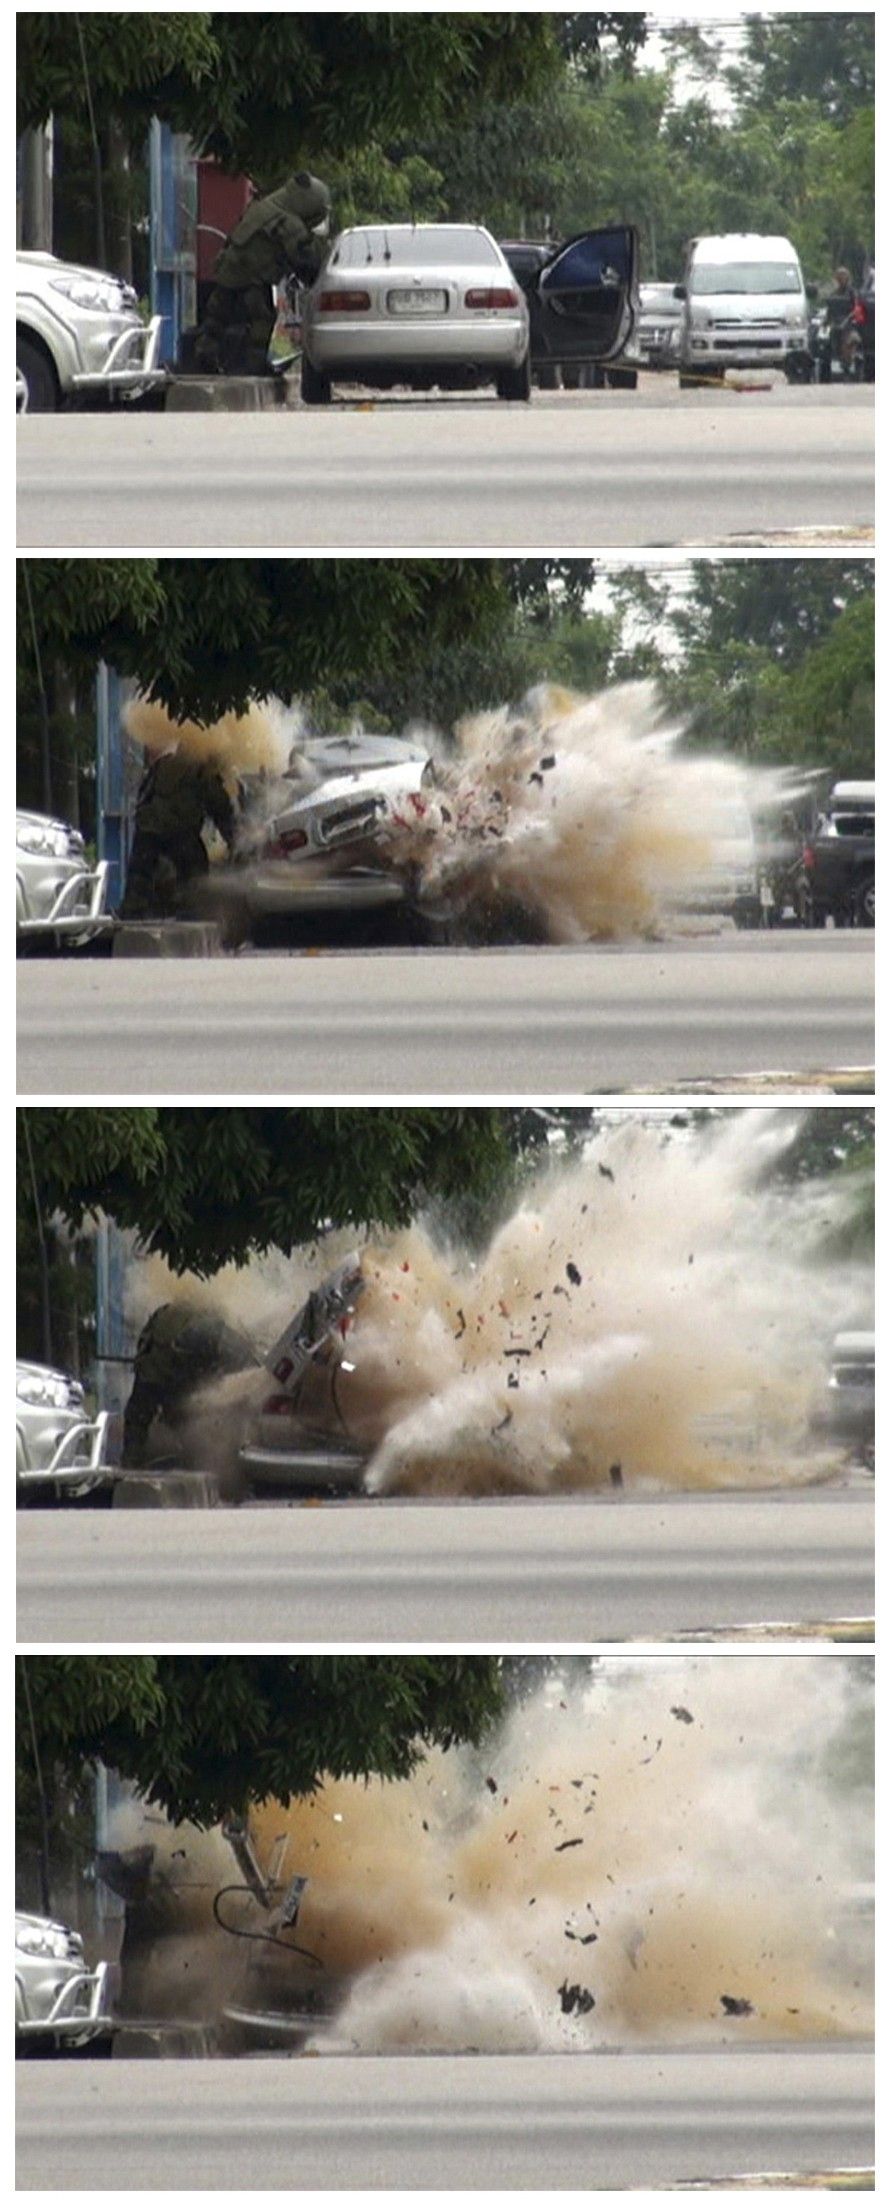 This combination photo shows a car bomb exploding as a member of a Thai bomb squad inspects it in Narathiwat province